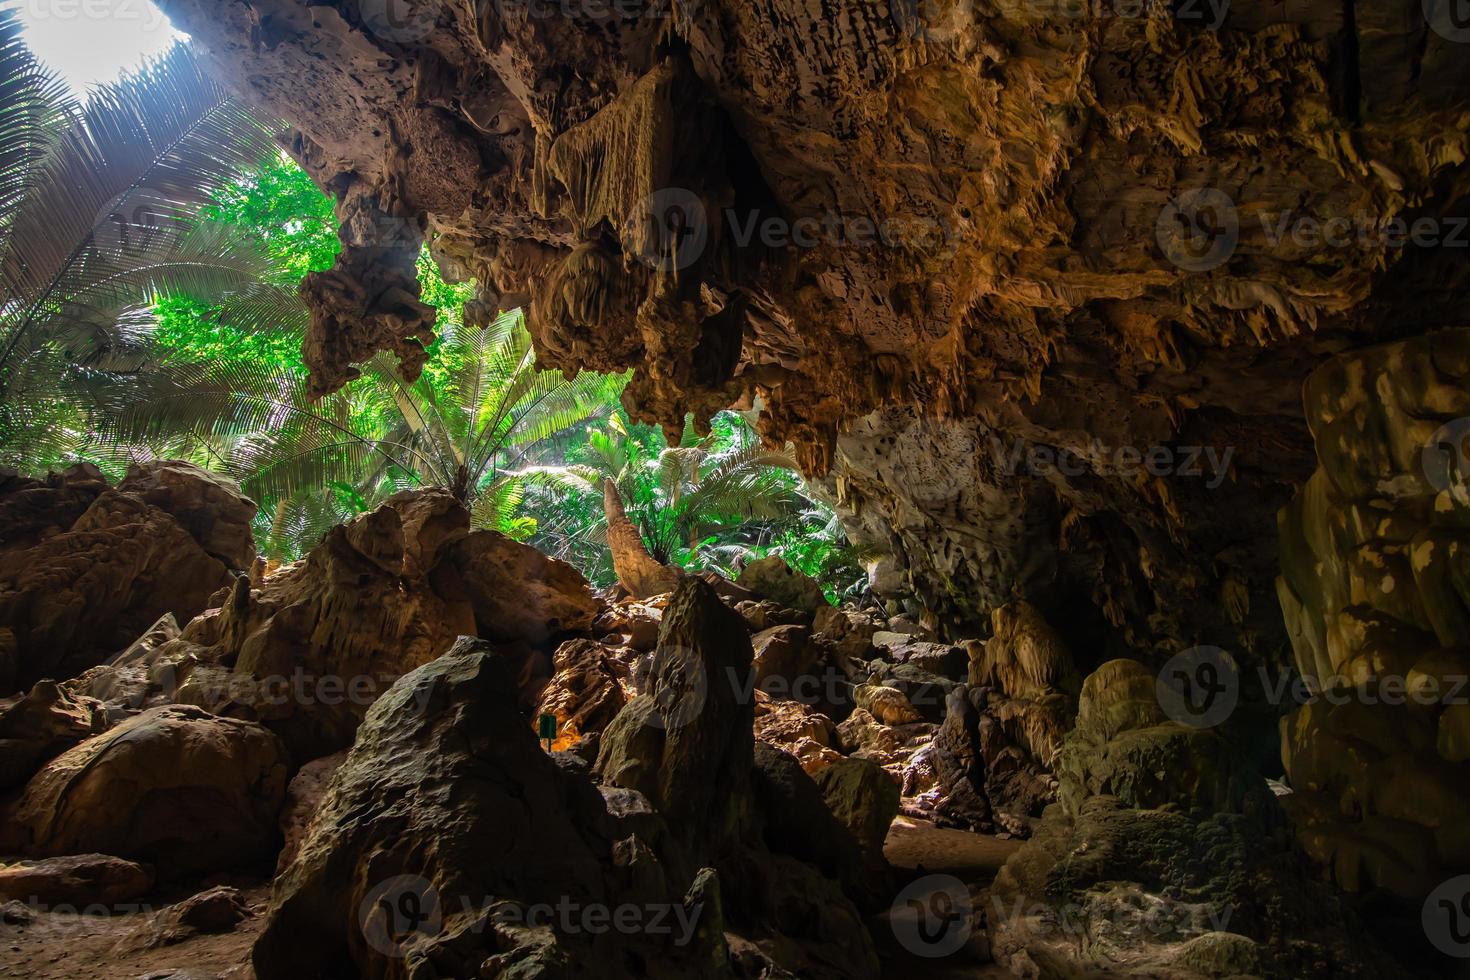 Landscape of cave and tree Hup Pa Tat, Uthai Thani, Thailand photo